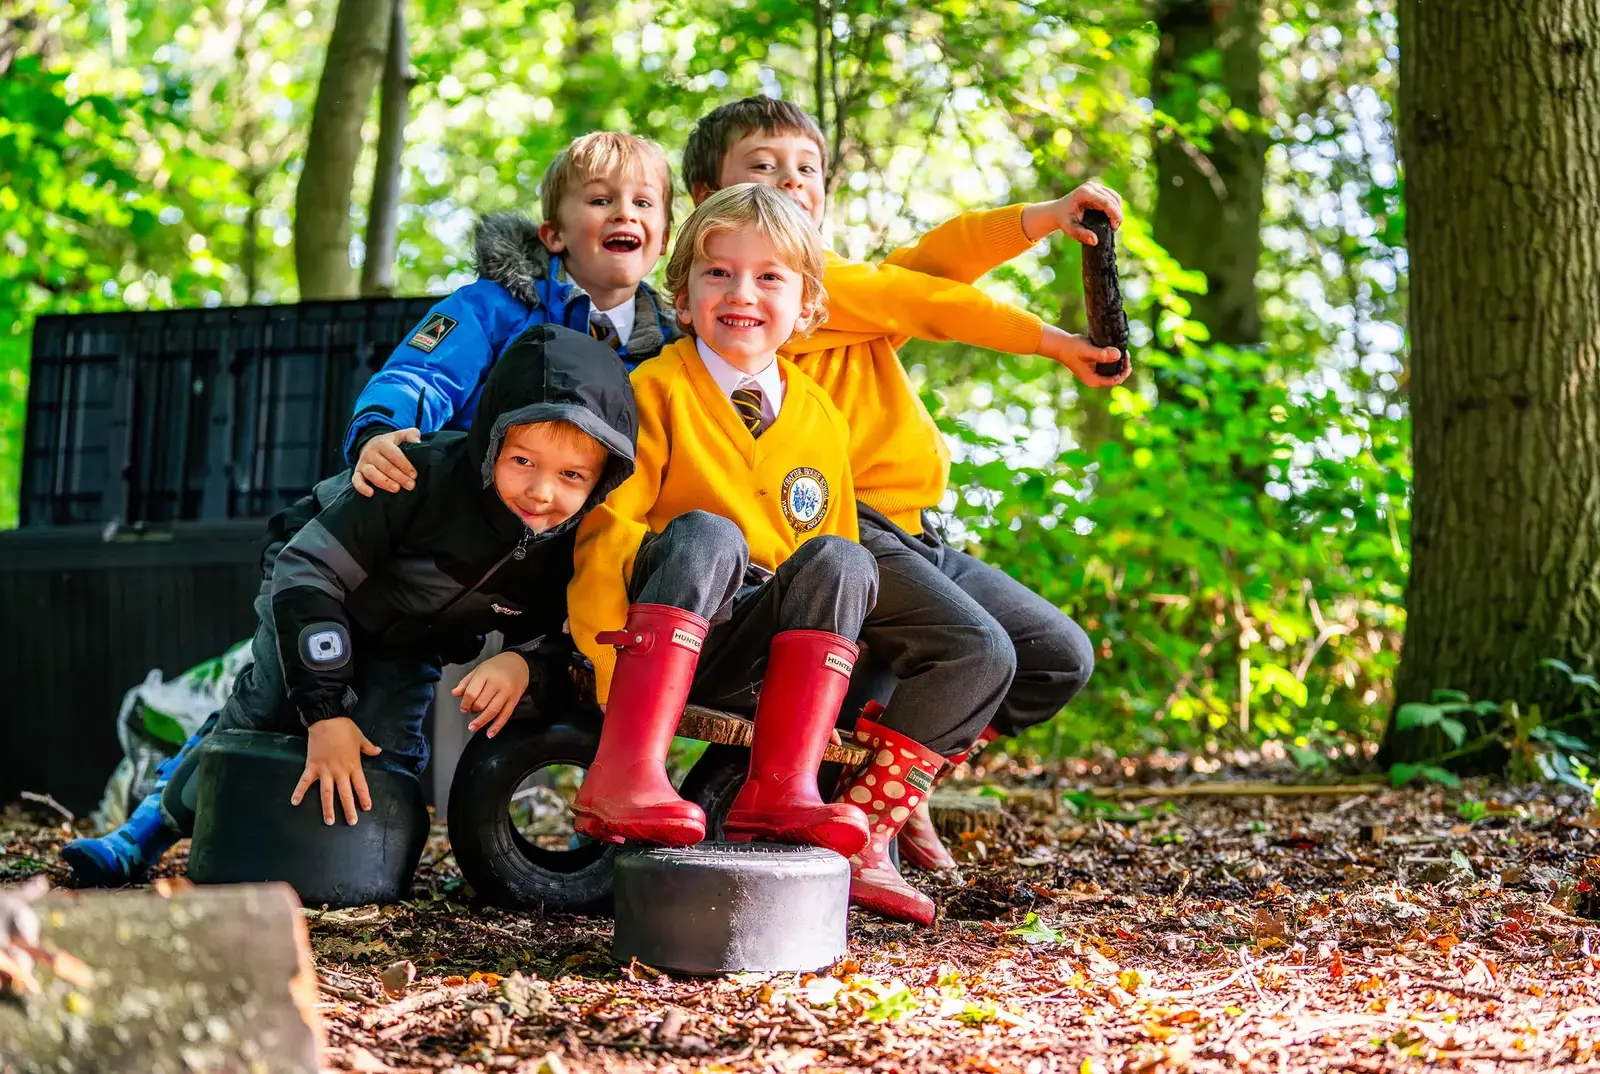 Chapter House pupils in Forest School